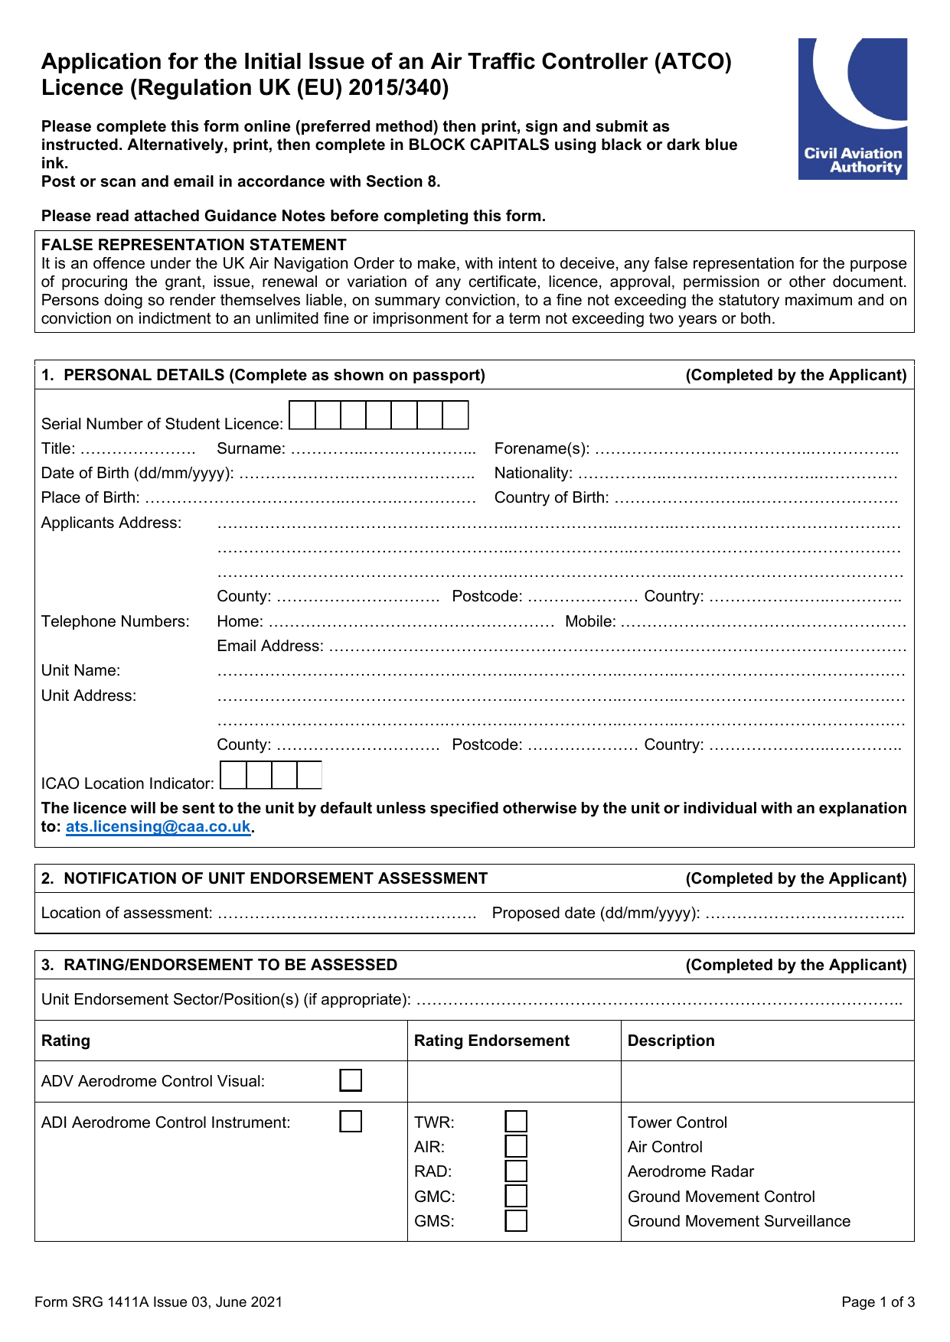 Form SRG1411A Application for the Initial Issue of an Air Traffic Controller (Atco) Licence (Regulation UK (Eu) 2015 / 340) - United Kingdom, Page 1